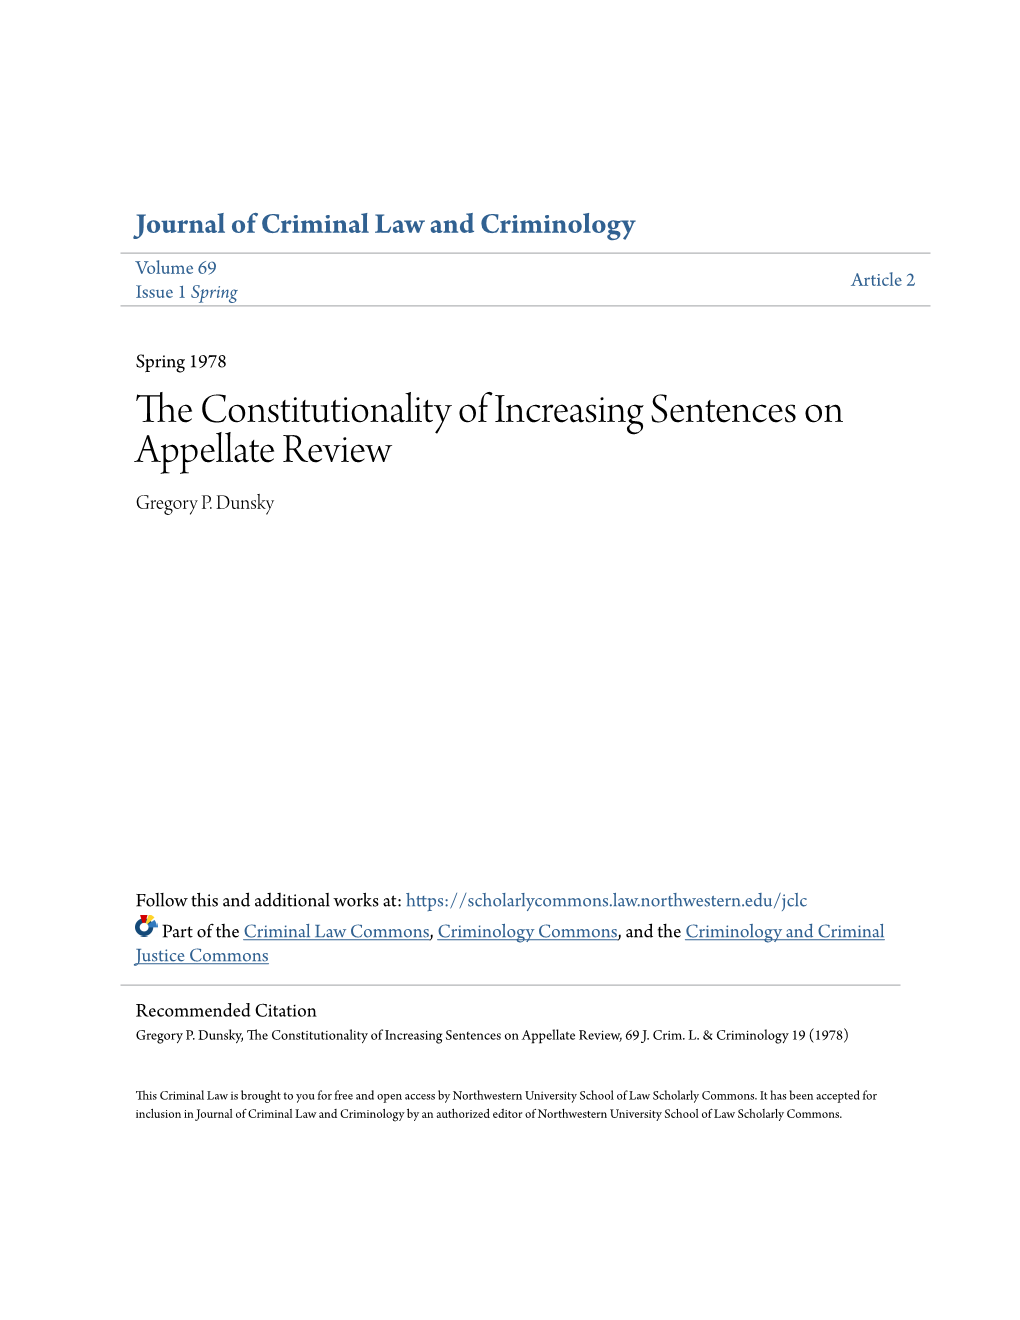 The Constitutionality of Increasing Sentences on Appellate Review